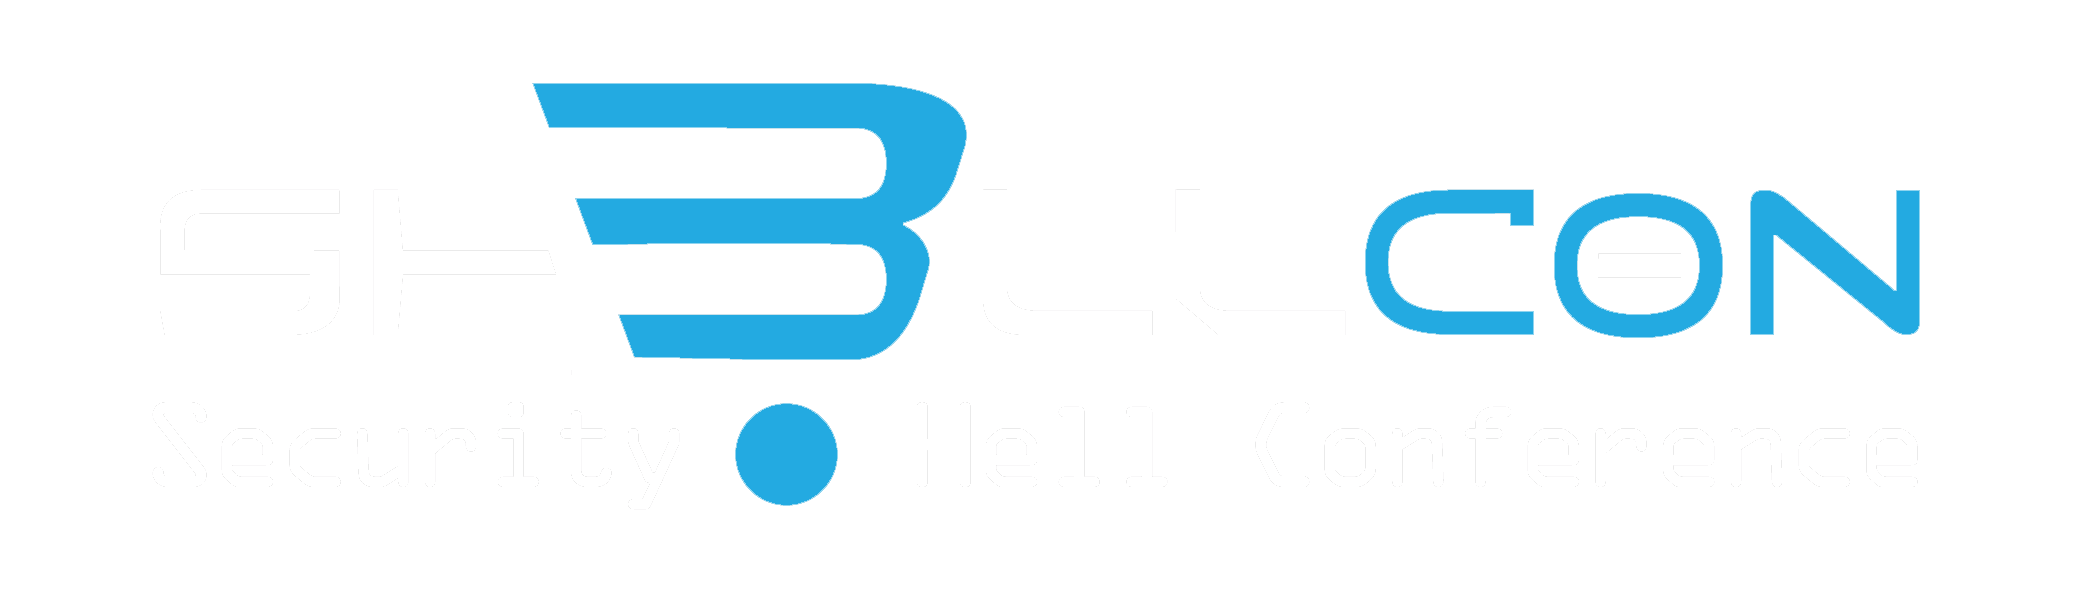 Sh3llCON - Security Hell Conference